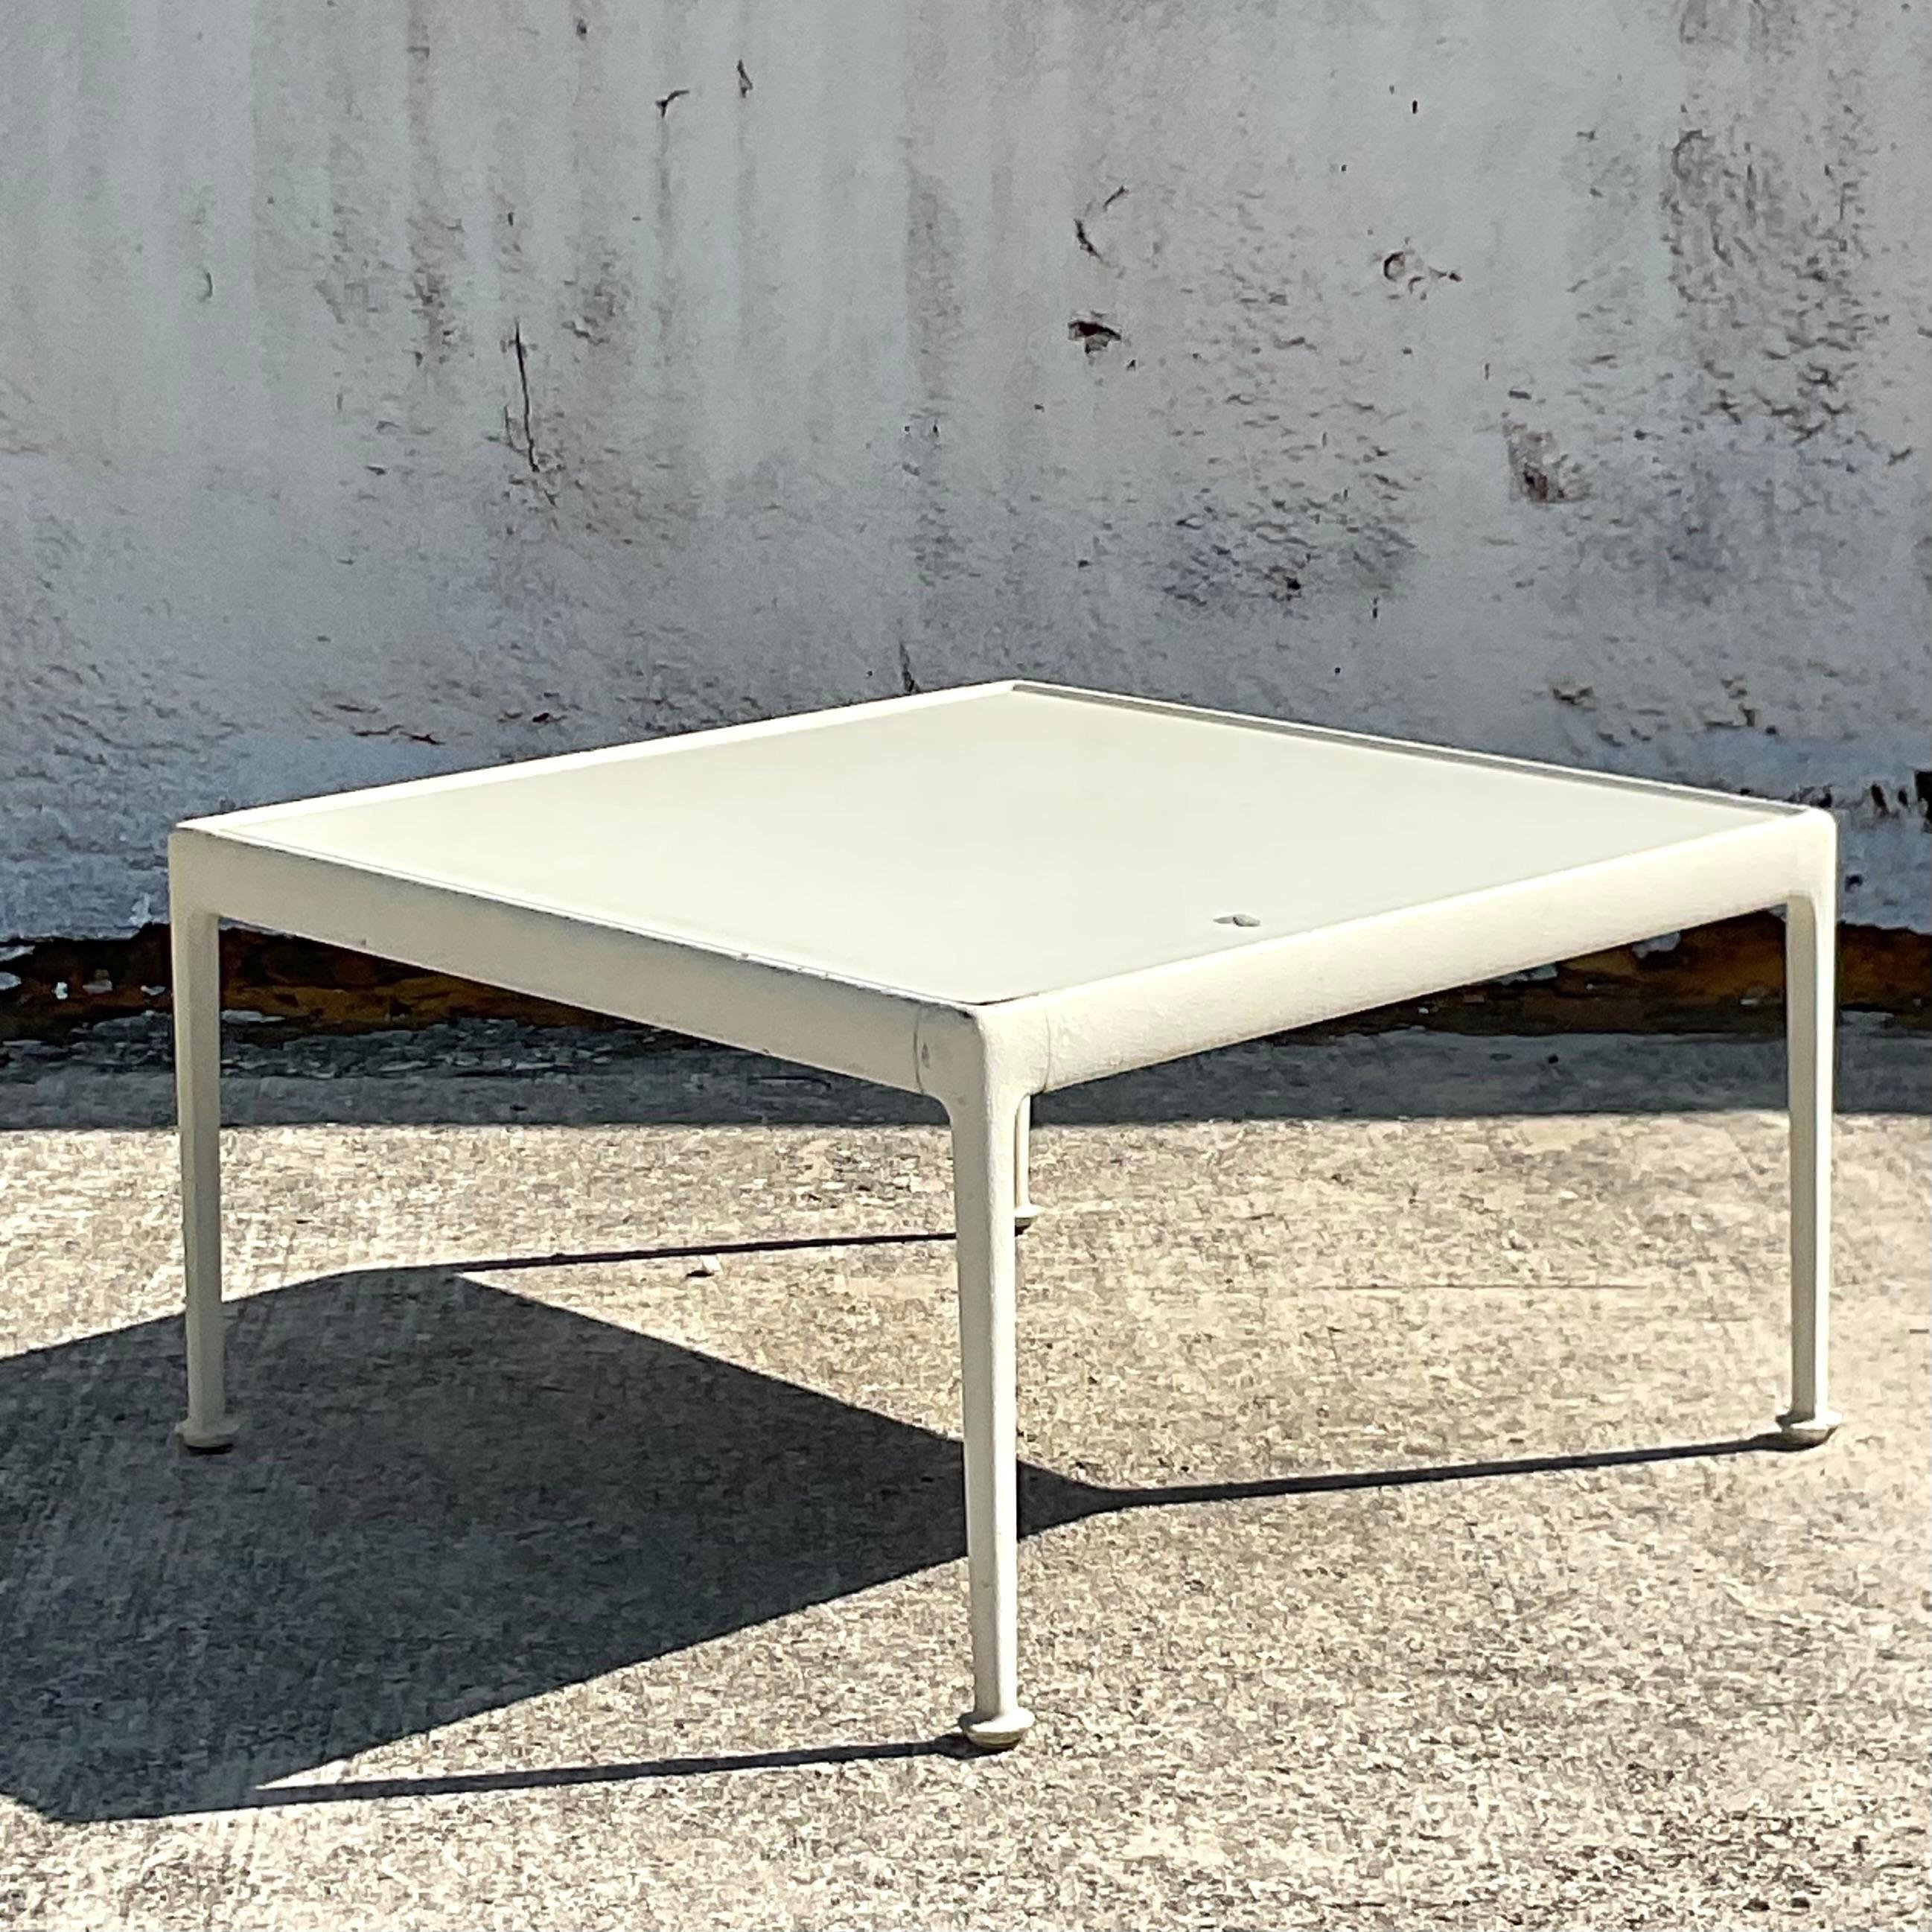 A fabulous vintage Contemporary low cocktail table. Designed by Richard Schultz for Knoll. This is a fab table that requires a full restoration. Unmarked. Acquired from a Palm Beach estate.